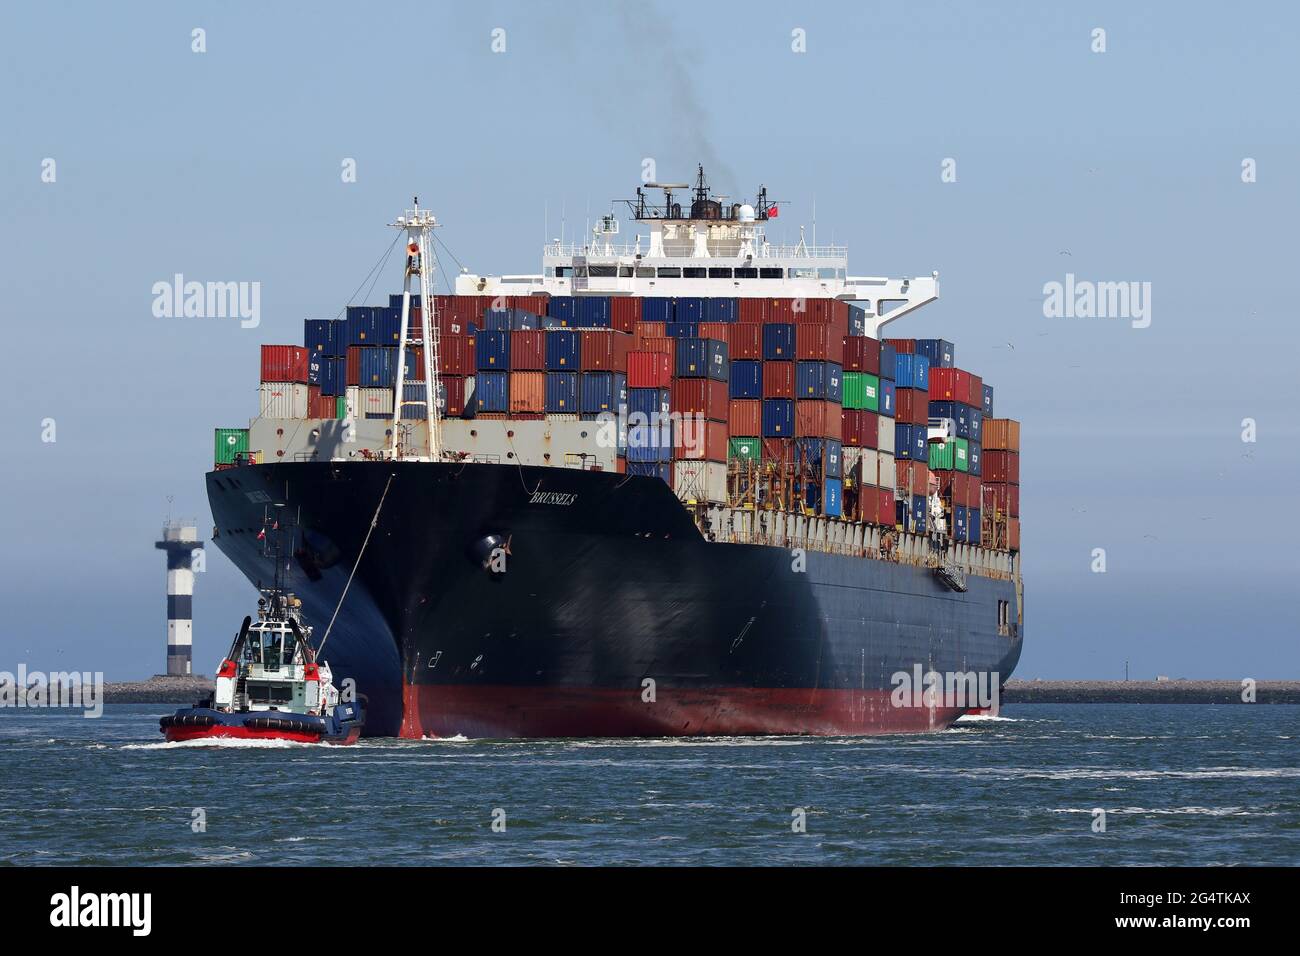 The container ship Brussels will reach the port of Rotterdam on May 29, 2021. Stock Photo